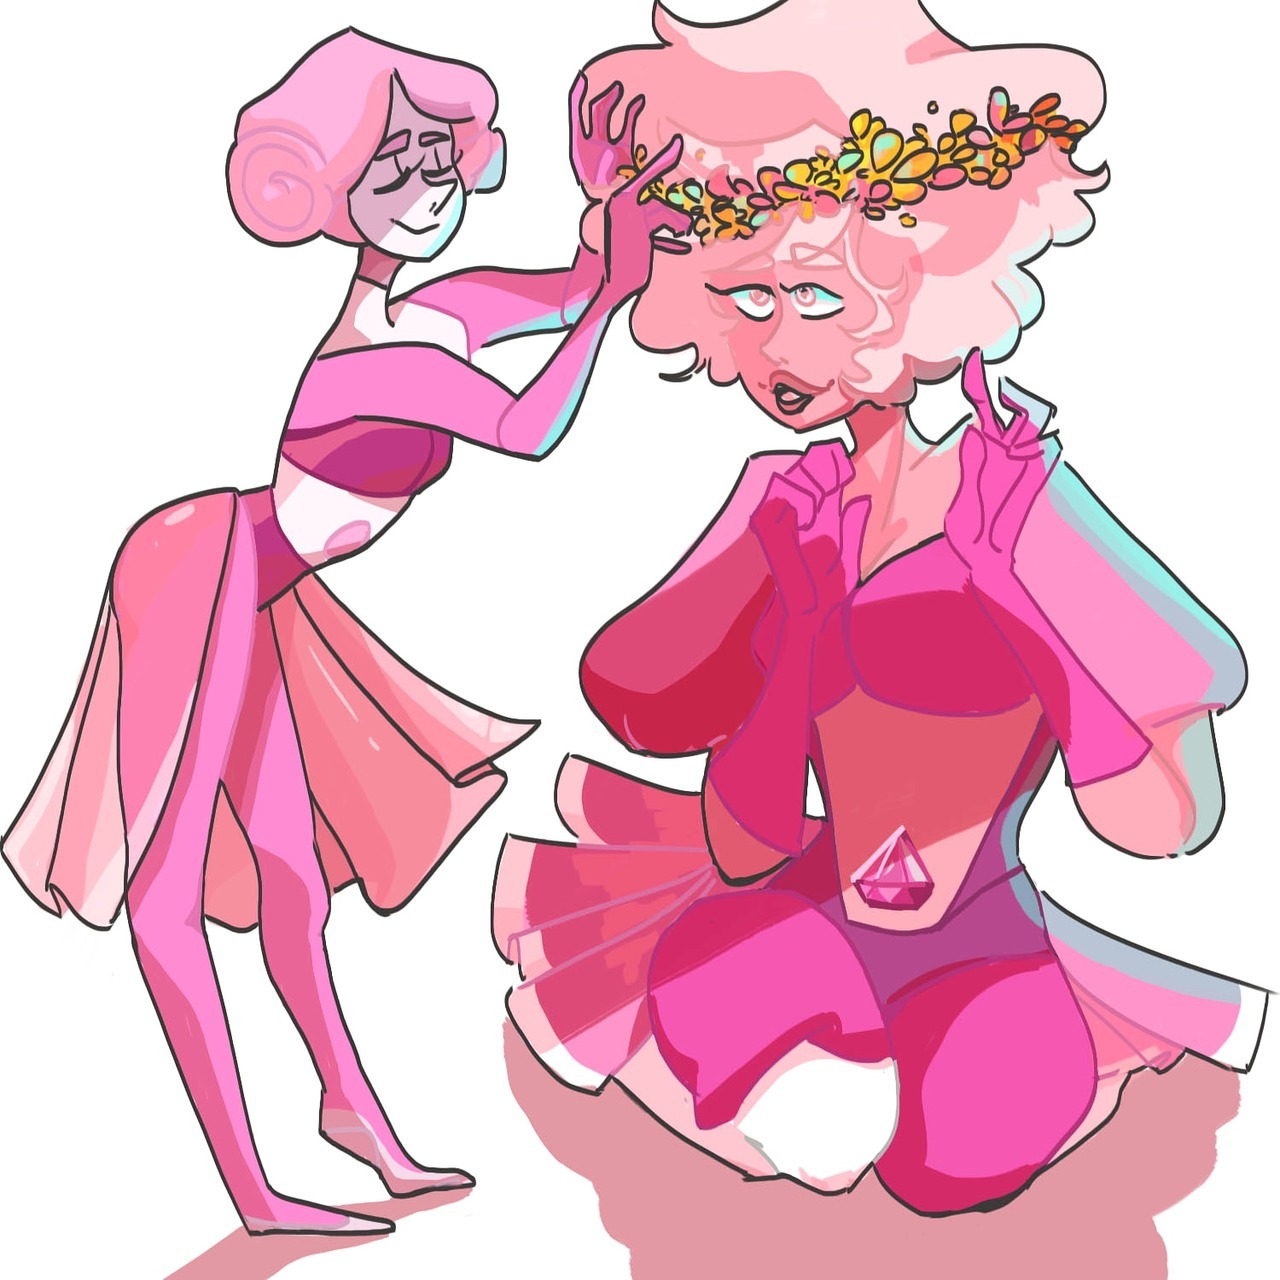 Some art I did before Change Your Mind of Pink Diamond and her original pearl